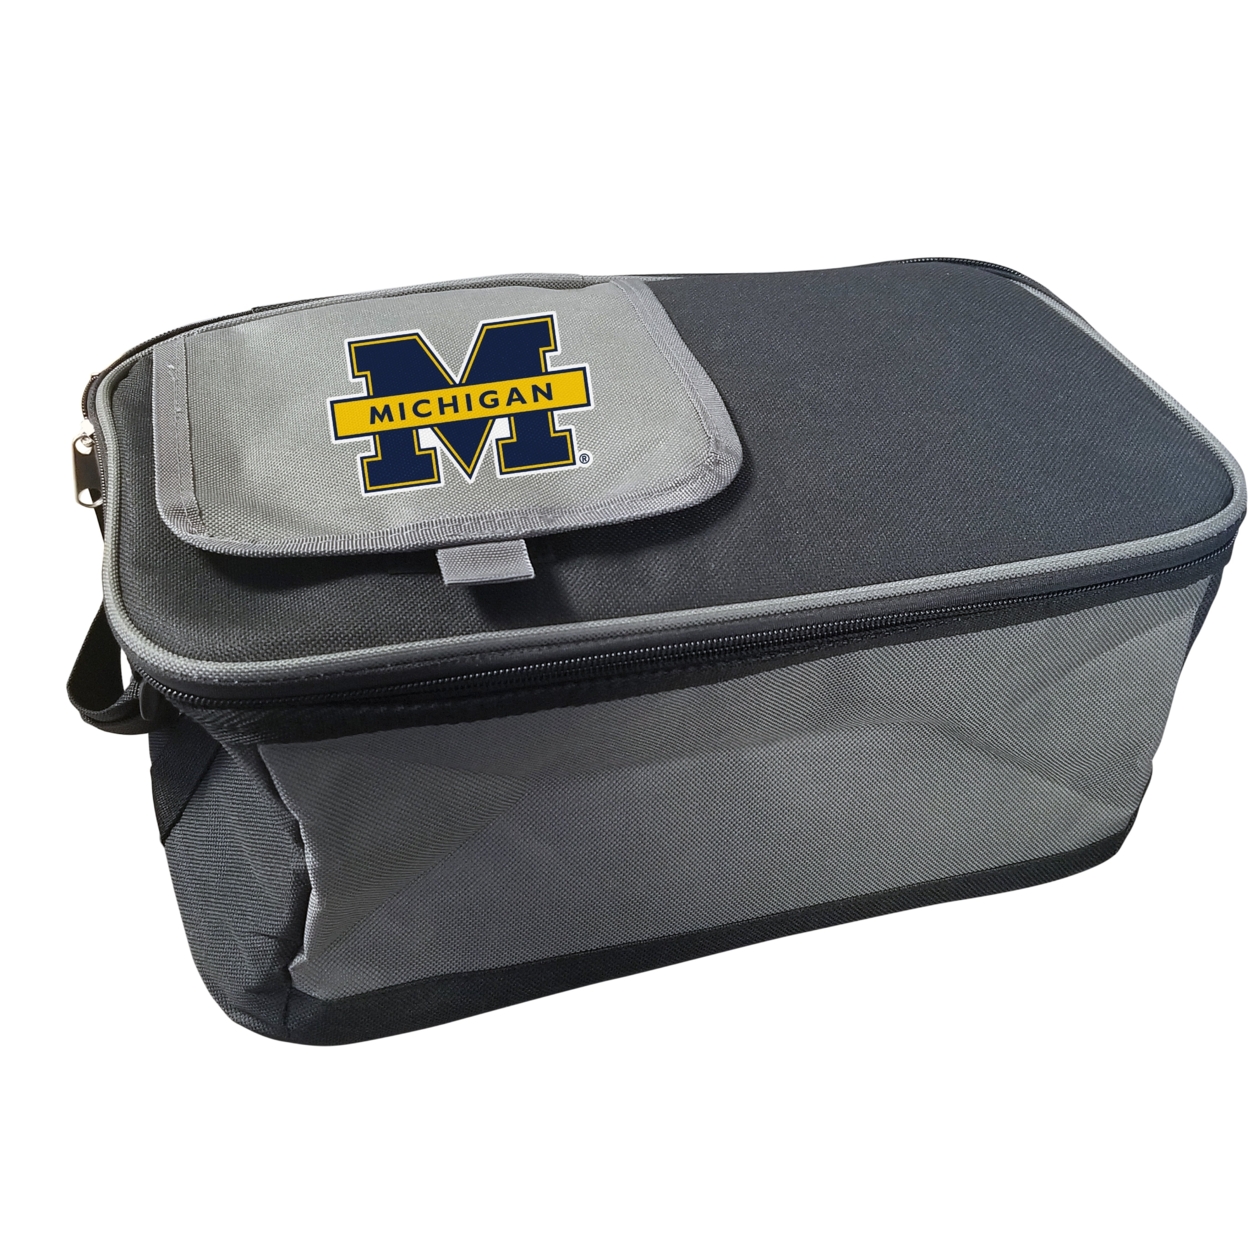 Michigan Wolverines 9 Pack Cooler